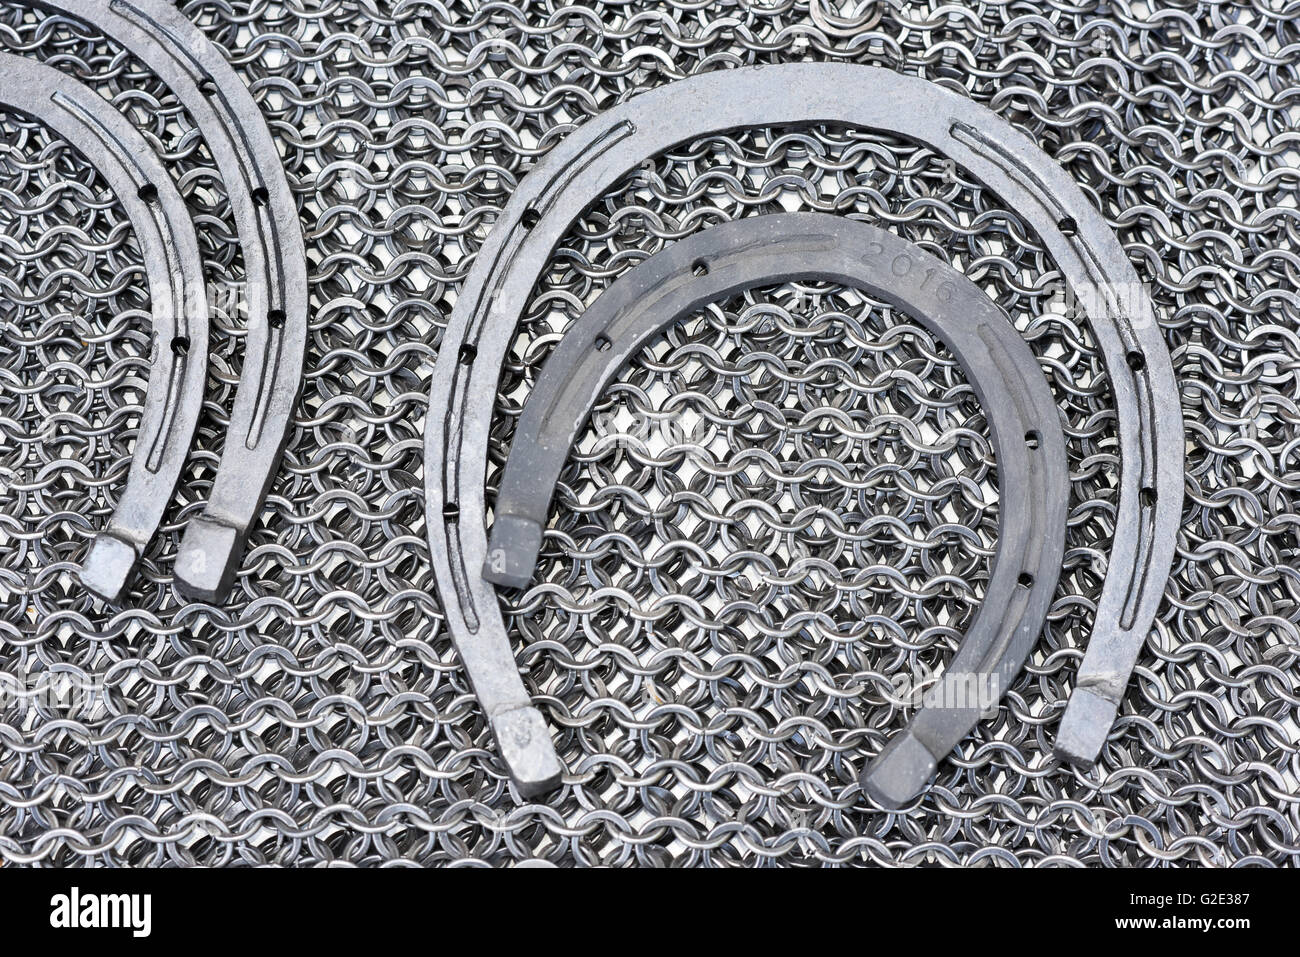 Metal products blacksmith - Military chainmail and horseshoe Stock Photo